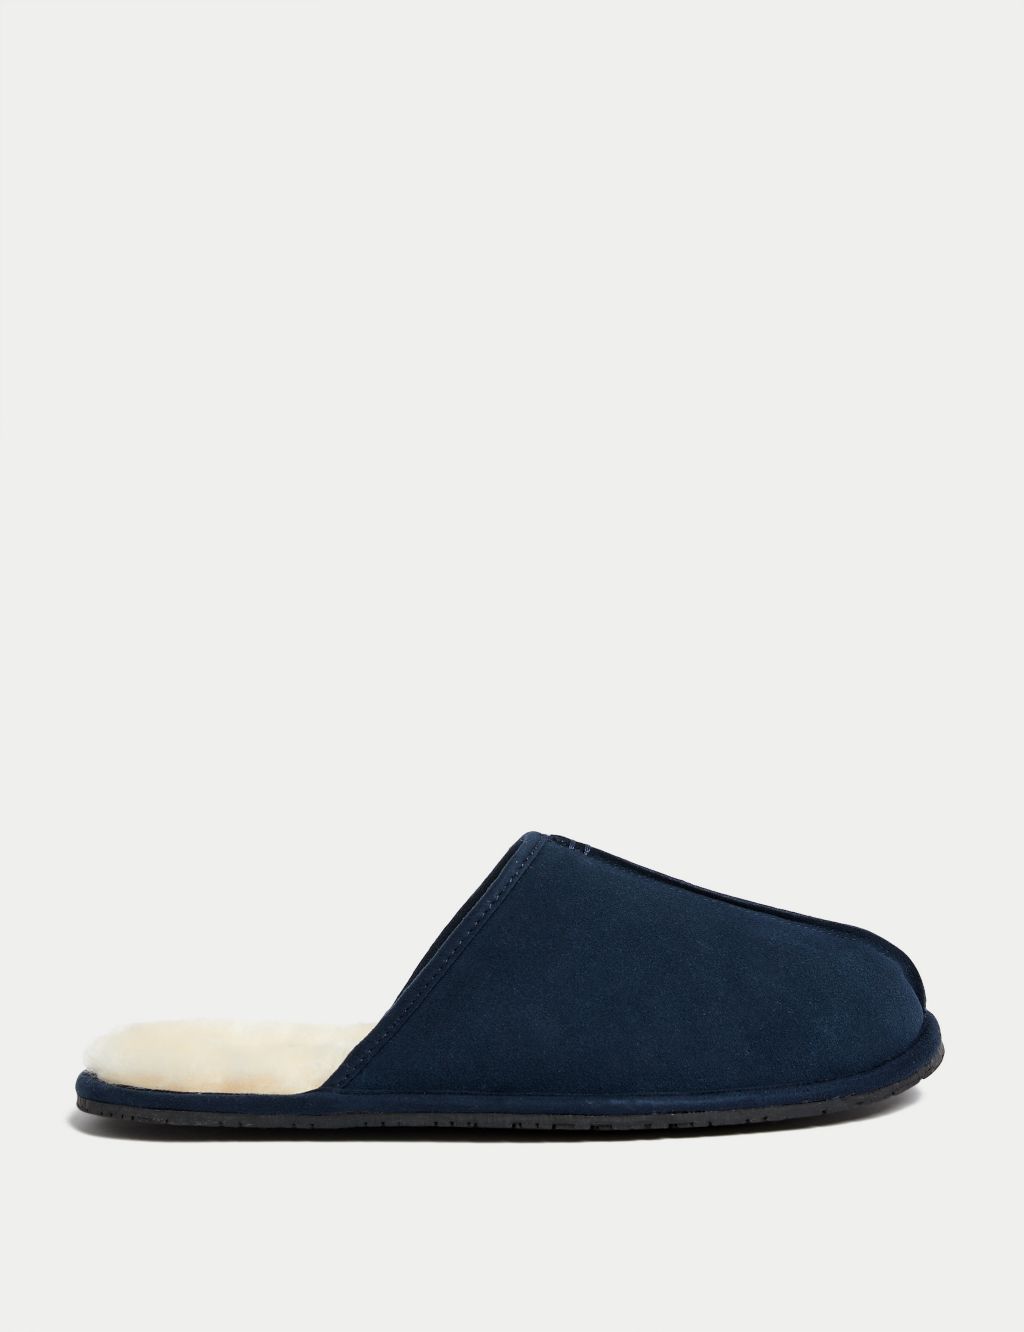 Men’s Leather Slippers |M&S | M&S